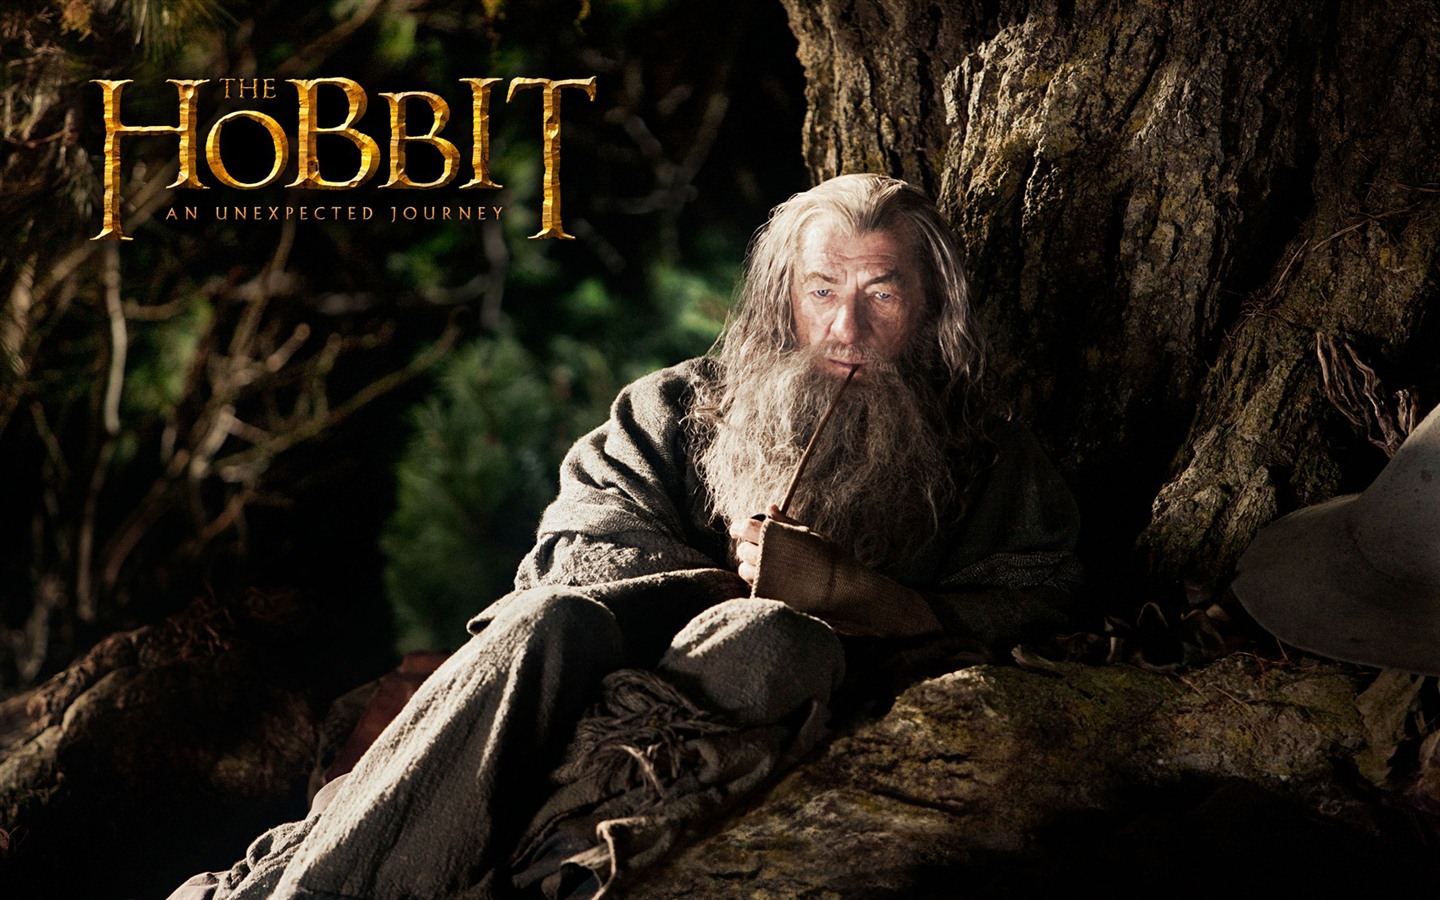 The Hobbit: An Unexpected Journey HD wallpapers #10 - 1440x900